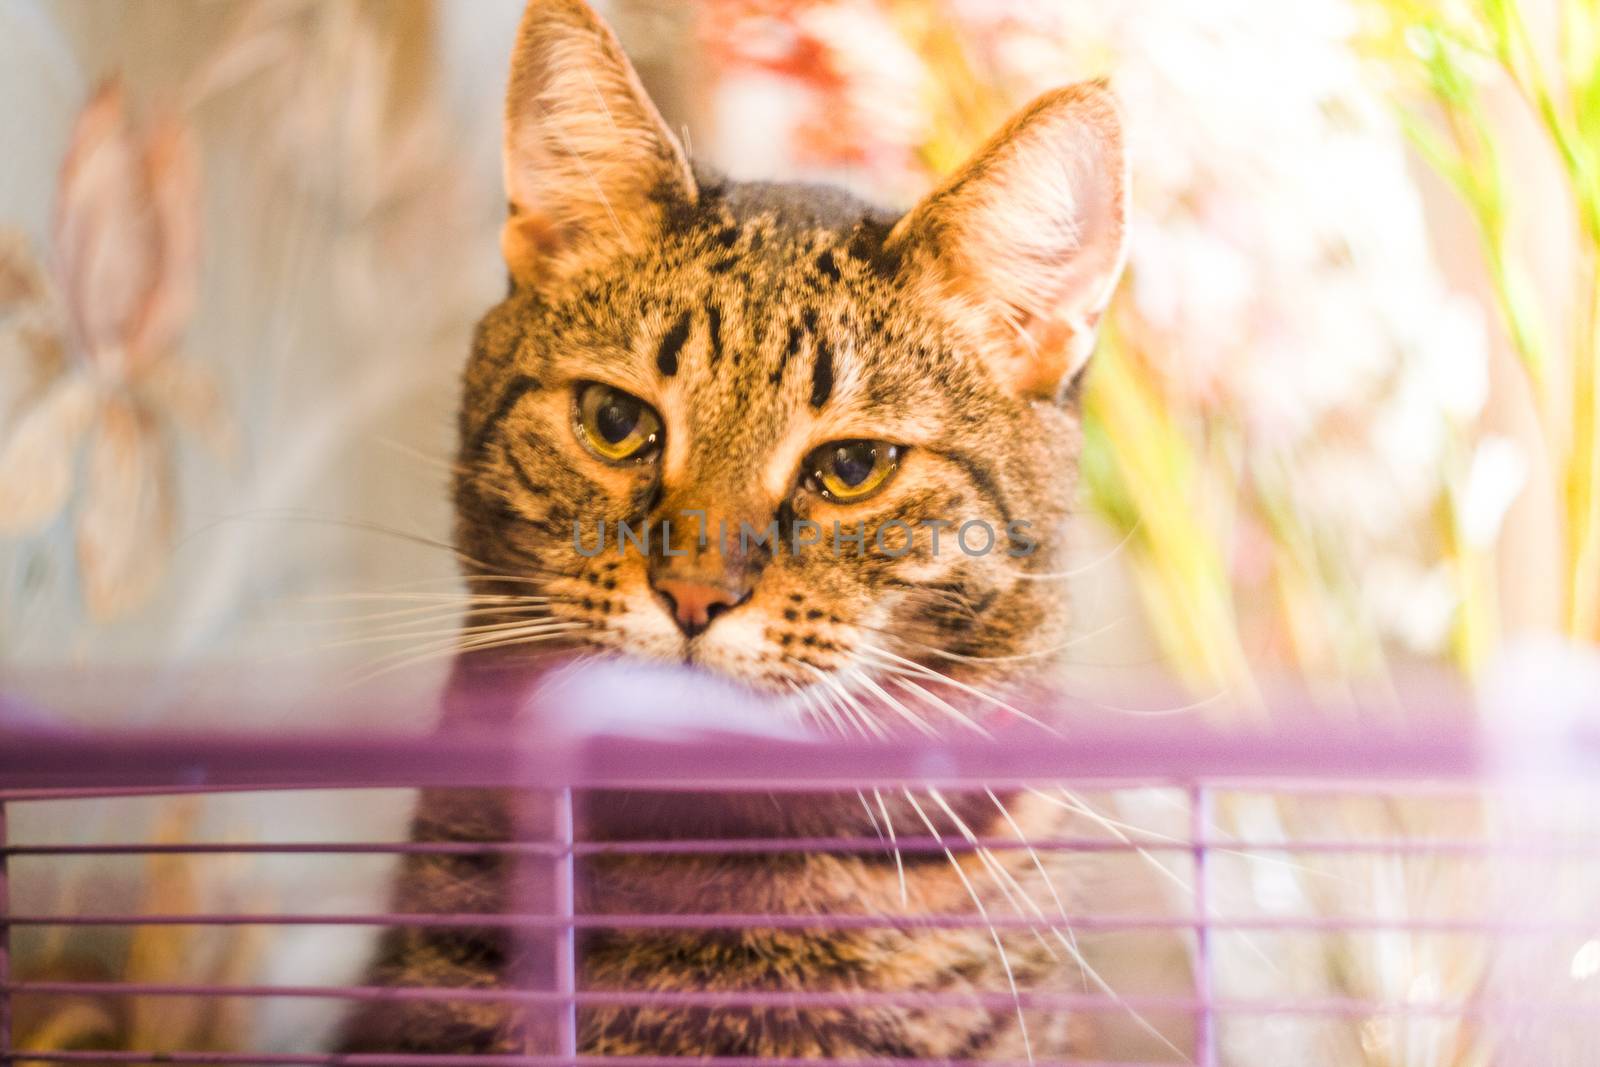 cat looks at the cage with a hamster by nolimit046